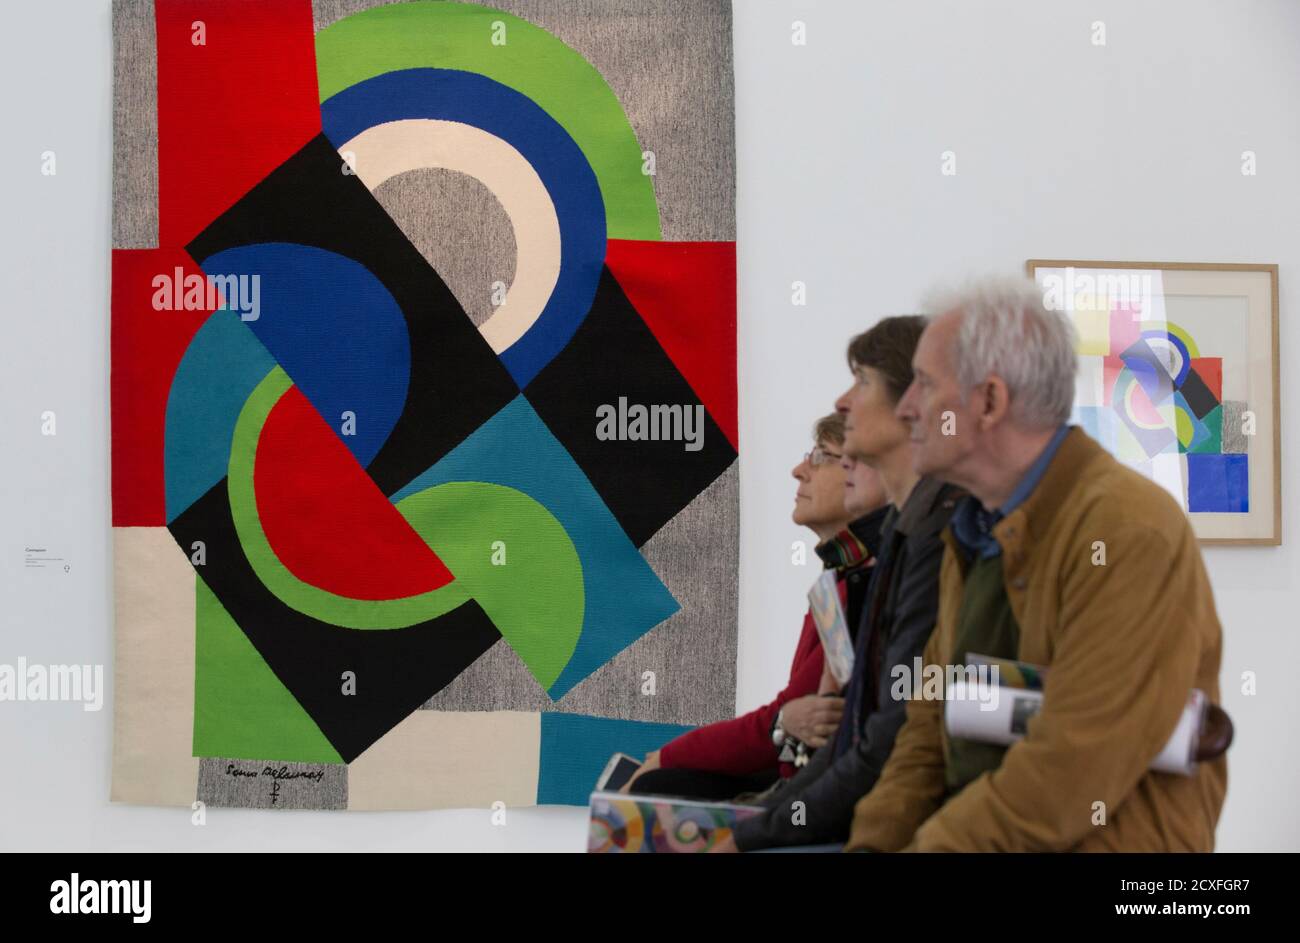 Visitors sit near paintings 'Contrepoints (1970)' (L) and 'Rythme Couleur (1967)' by artist Sonia Delaunay (1885-1979) during the press visit of the exhibition 'Sonia Delaunay, The Colours of Abstraction' at the Musee d?Art Moderne (Modern Art Museum) in Paris October 16, 2014. The exhibition, which traces the artist's evolution since the beginning of the 20th century to the late 1970s with over 400 works, will run from October 17, 2014 to February 22, 2015.    REUTERS/Philippe Wojazer  (FRANCE - Tags: SOCIETY) Stock Photo